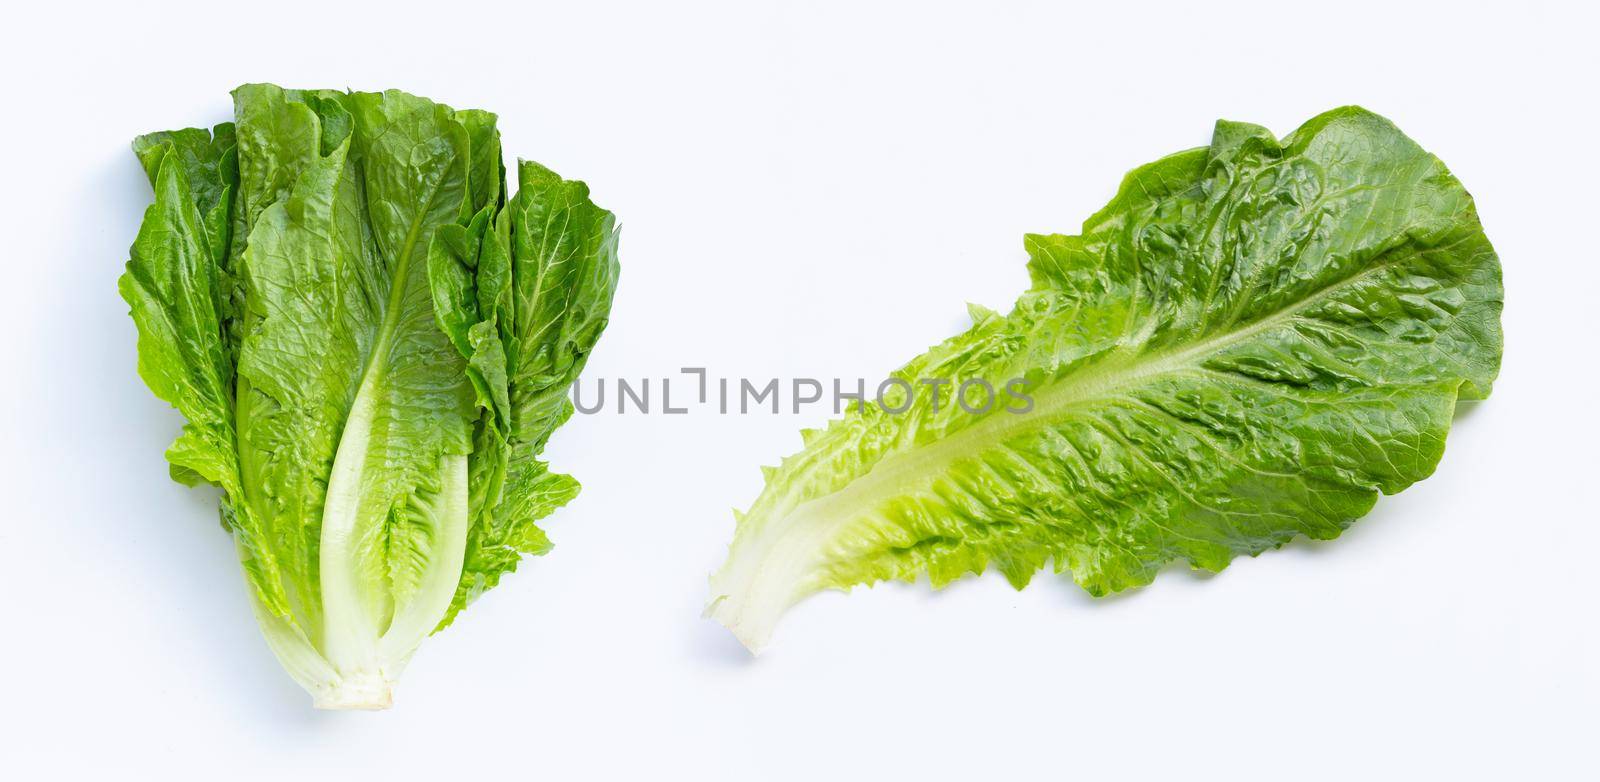 Fresh romaine lettuce isolated on a white background by Bowonpat